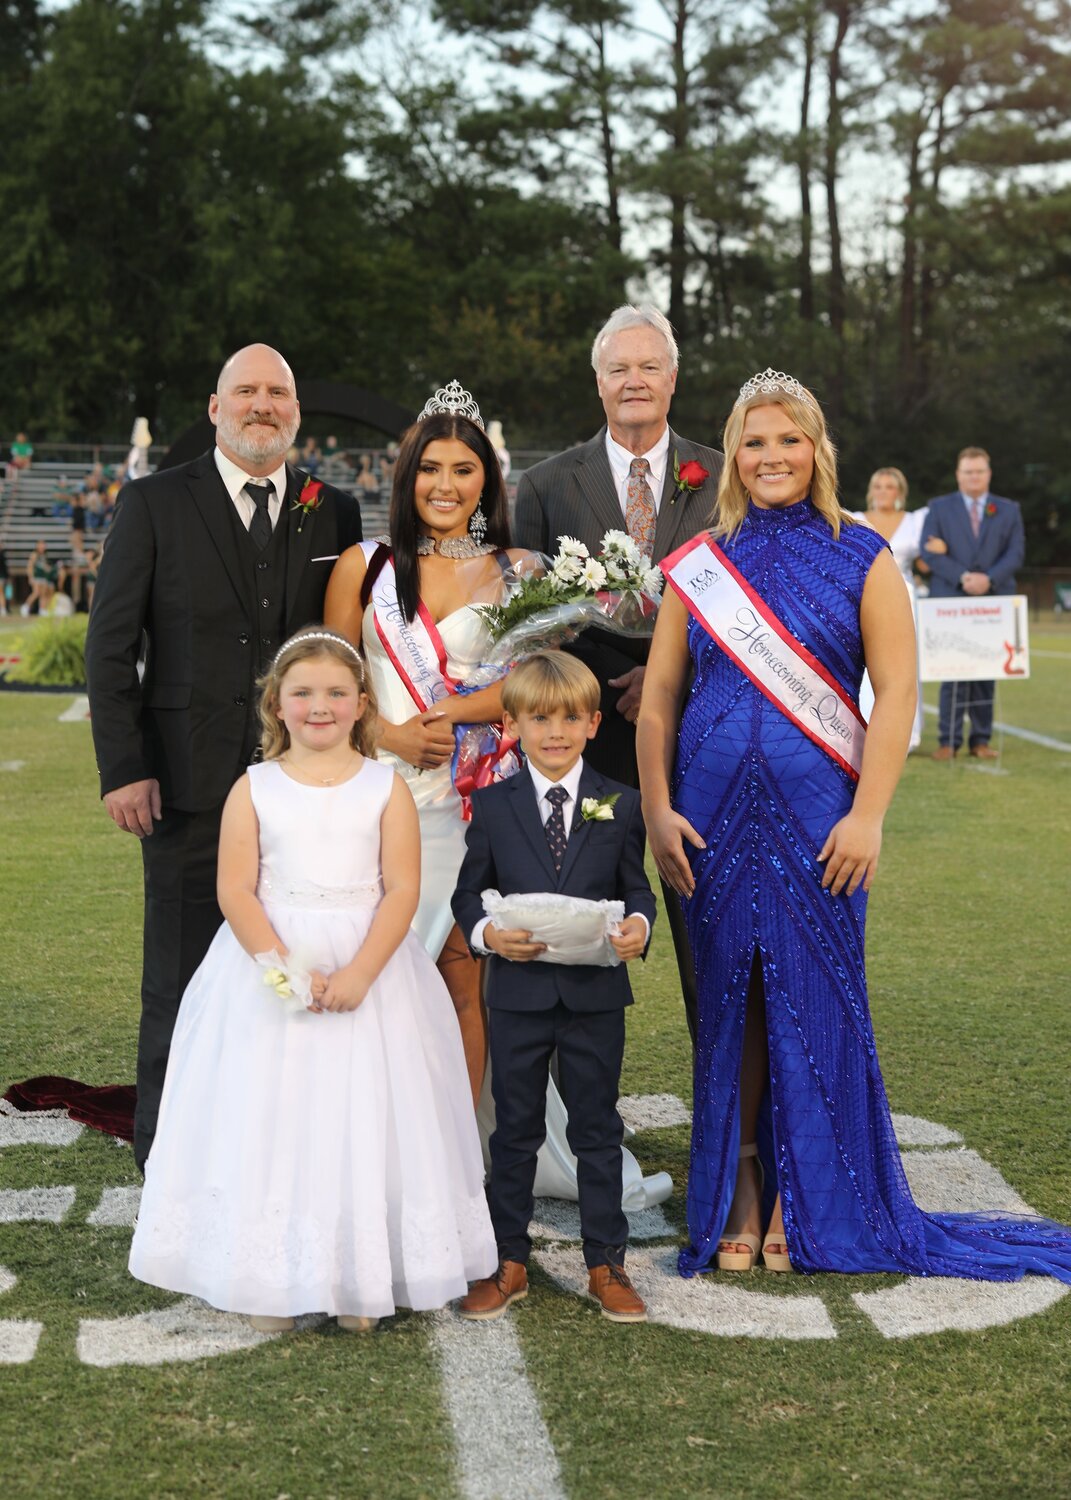 Pictured, front row from left, are Adley Moriarty and John Rollins Harris (Back) Tony Hatfield, 2023 Queen Mia Hatfield, 2022 Queen Kate Crawford Shepherd and Headmaster Steve Fleming